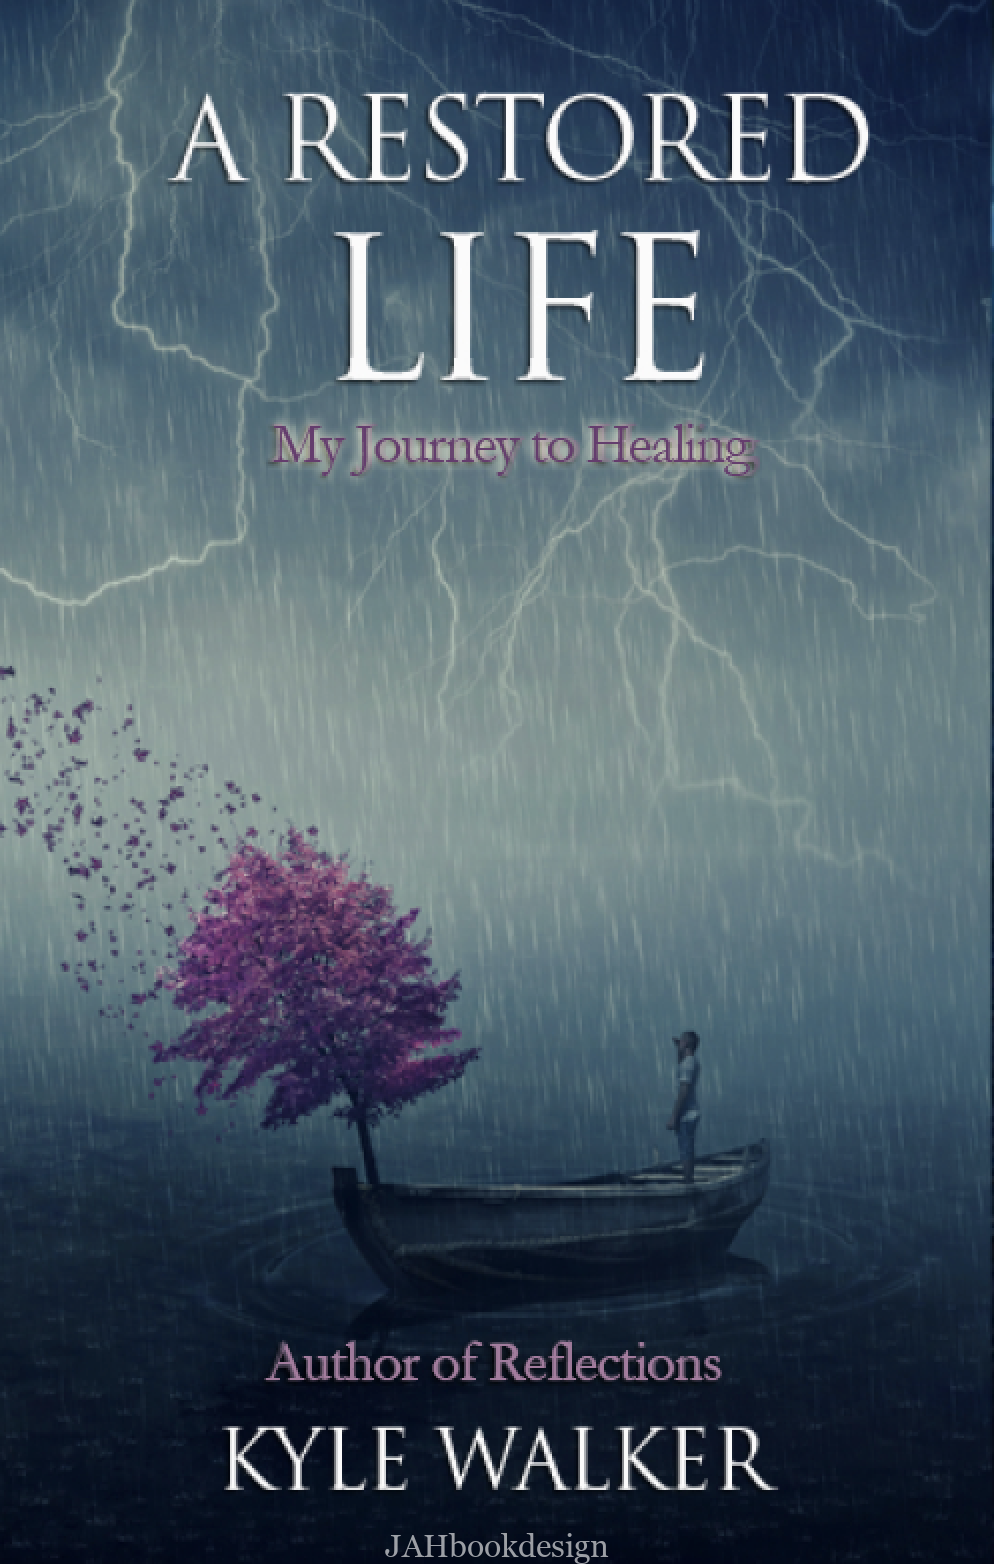 A restored life: My journey to healing